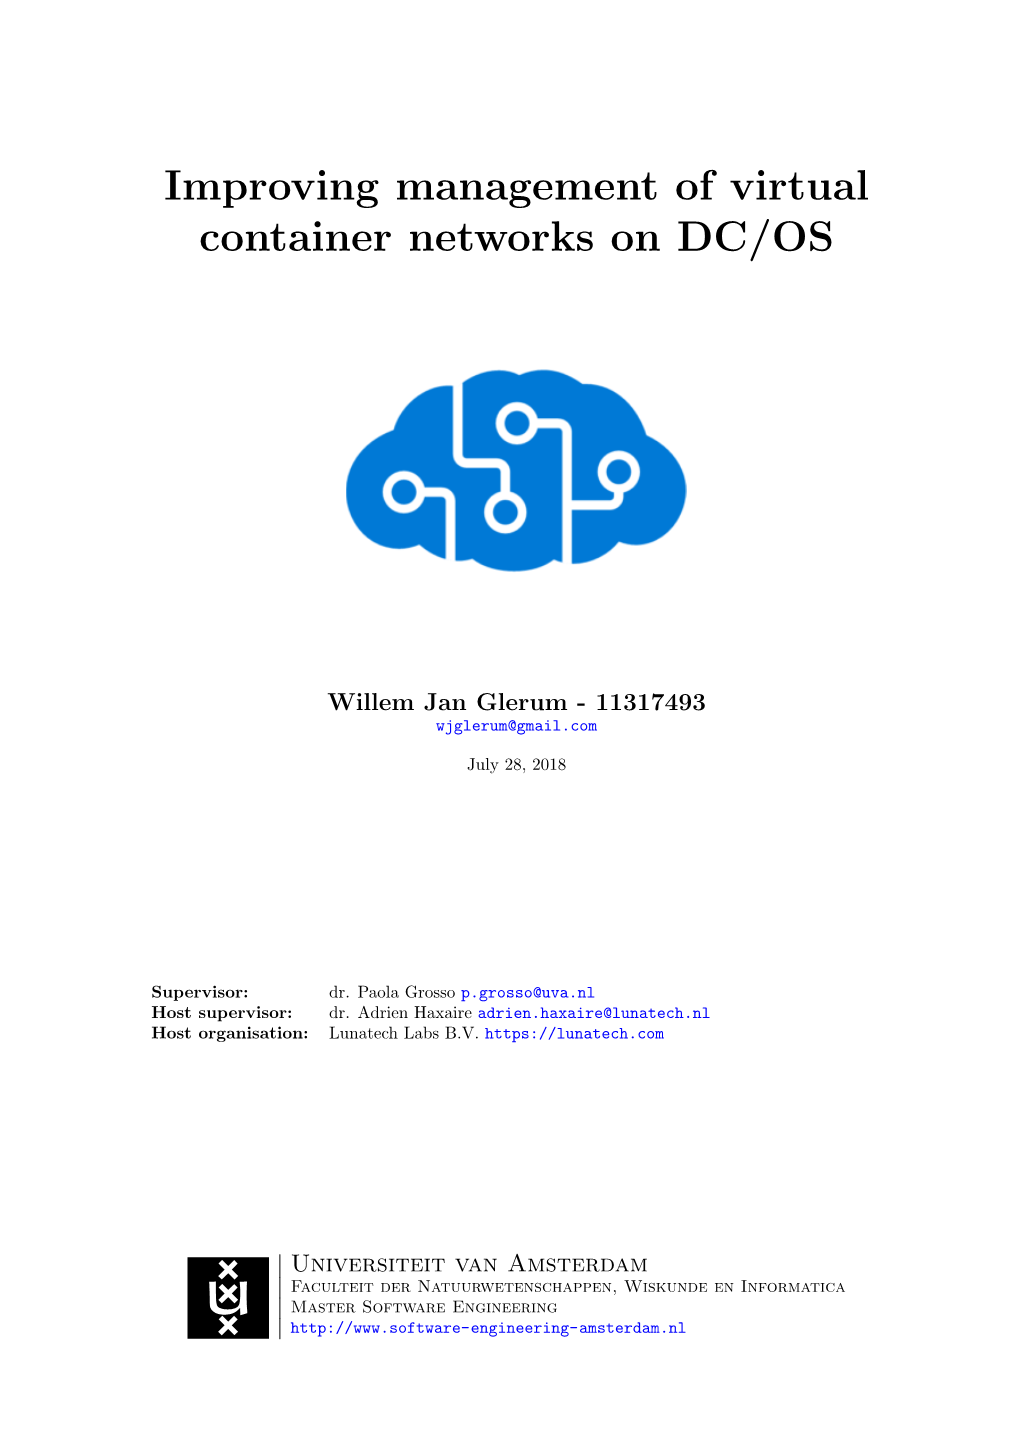 Improving Management of Virtual Container Networks on DC/OS